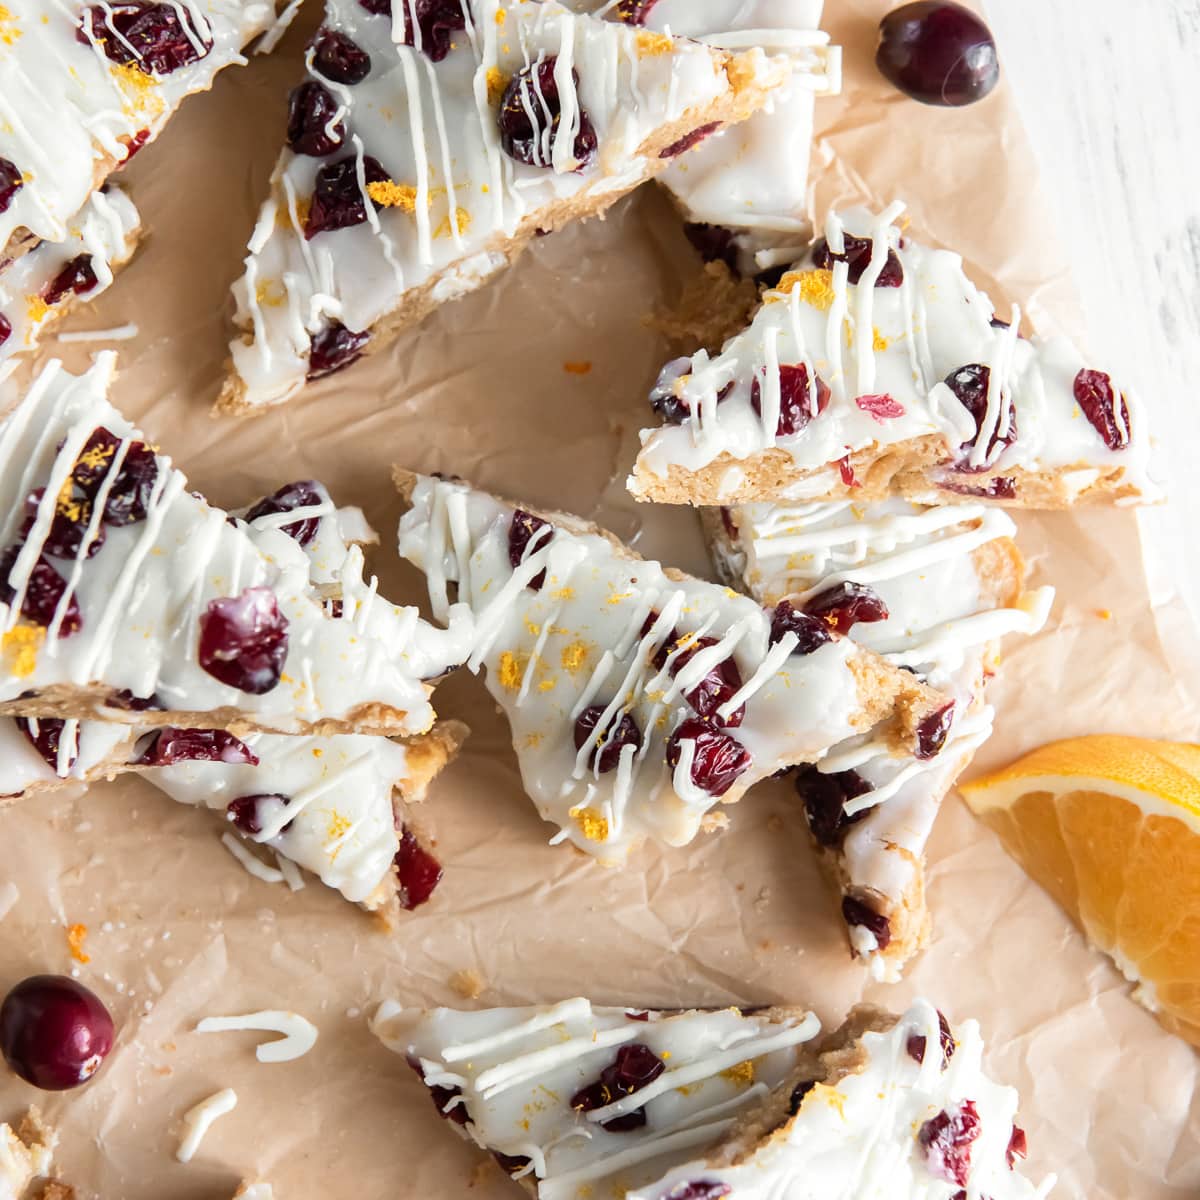 cranberry bliss bars topped with white chocolate, dried cranberries and orange zest.